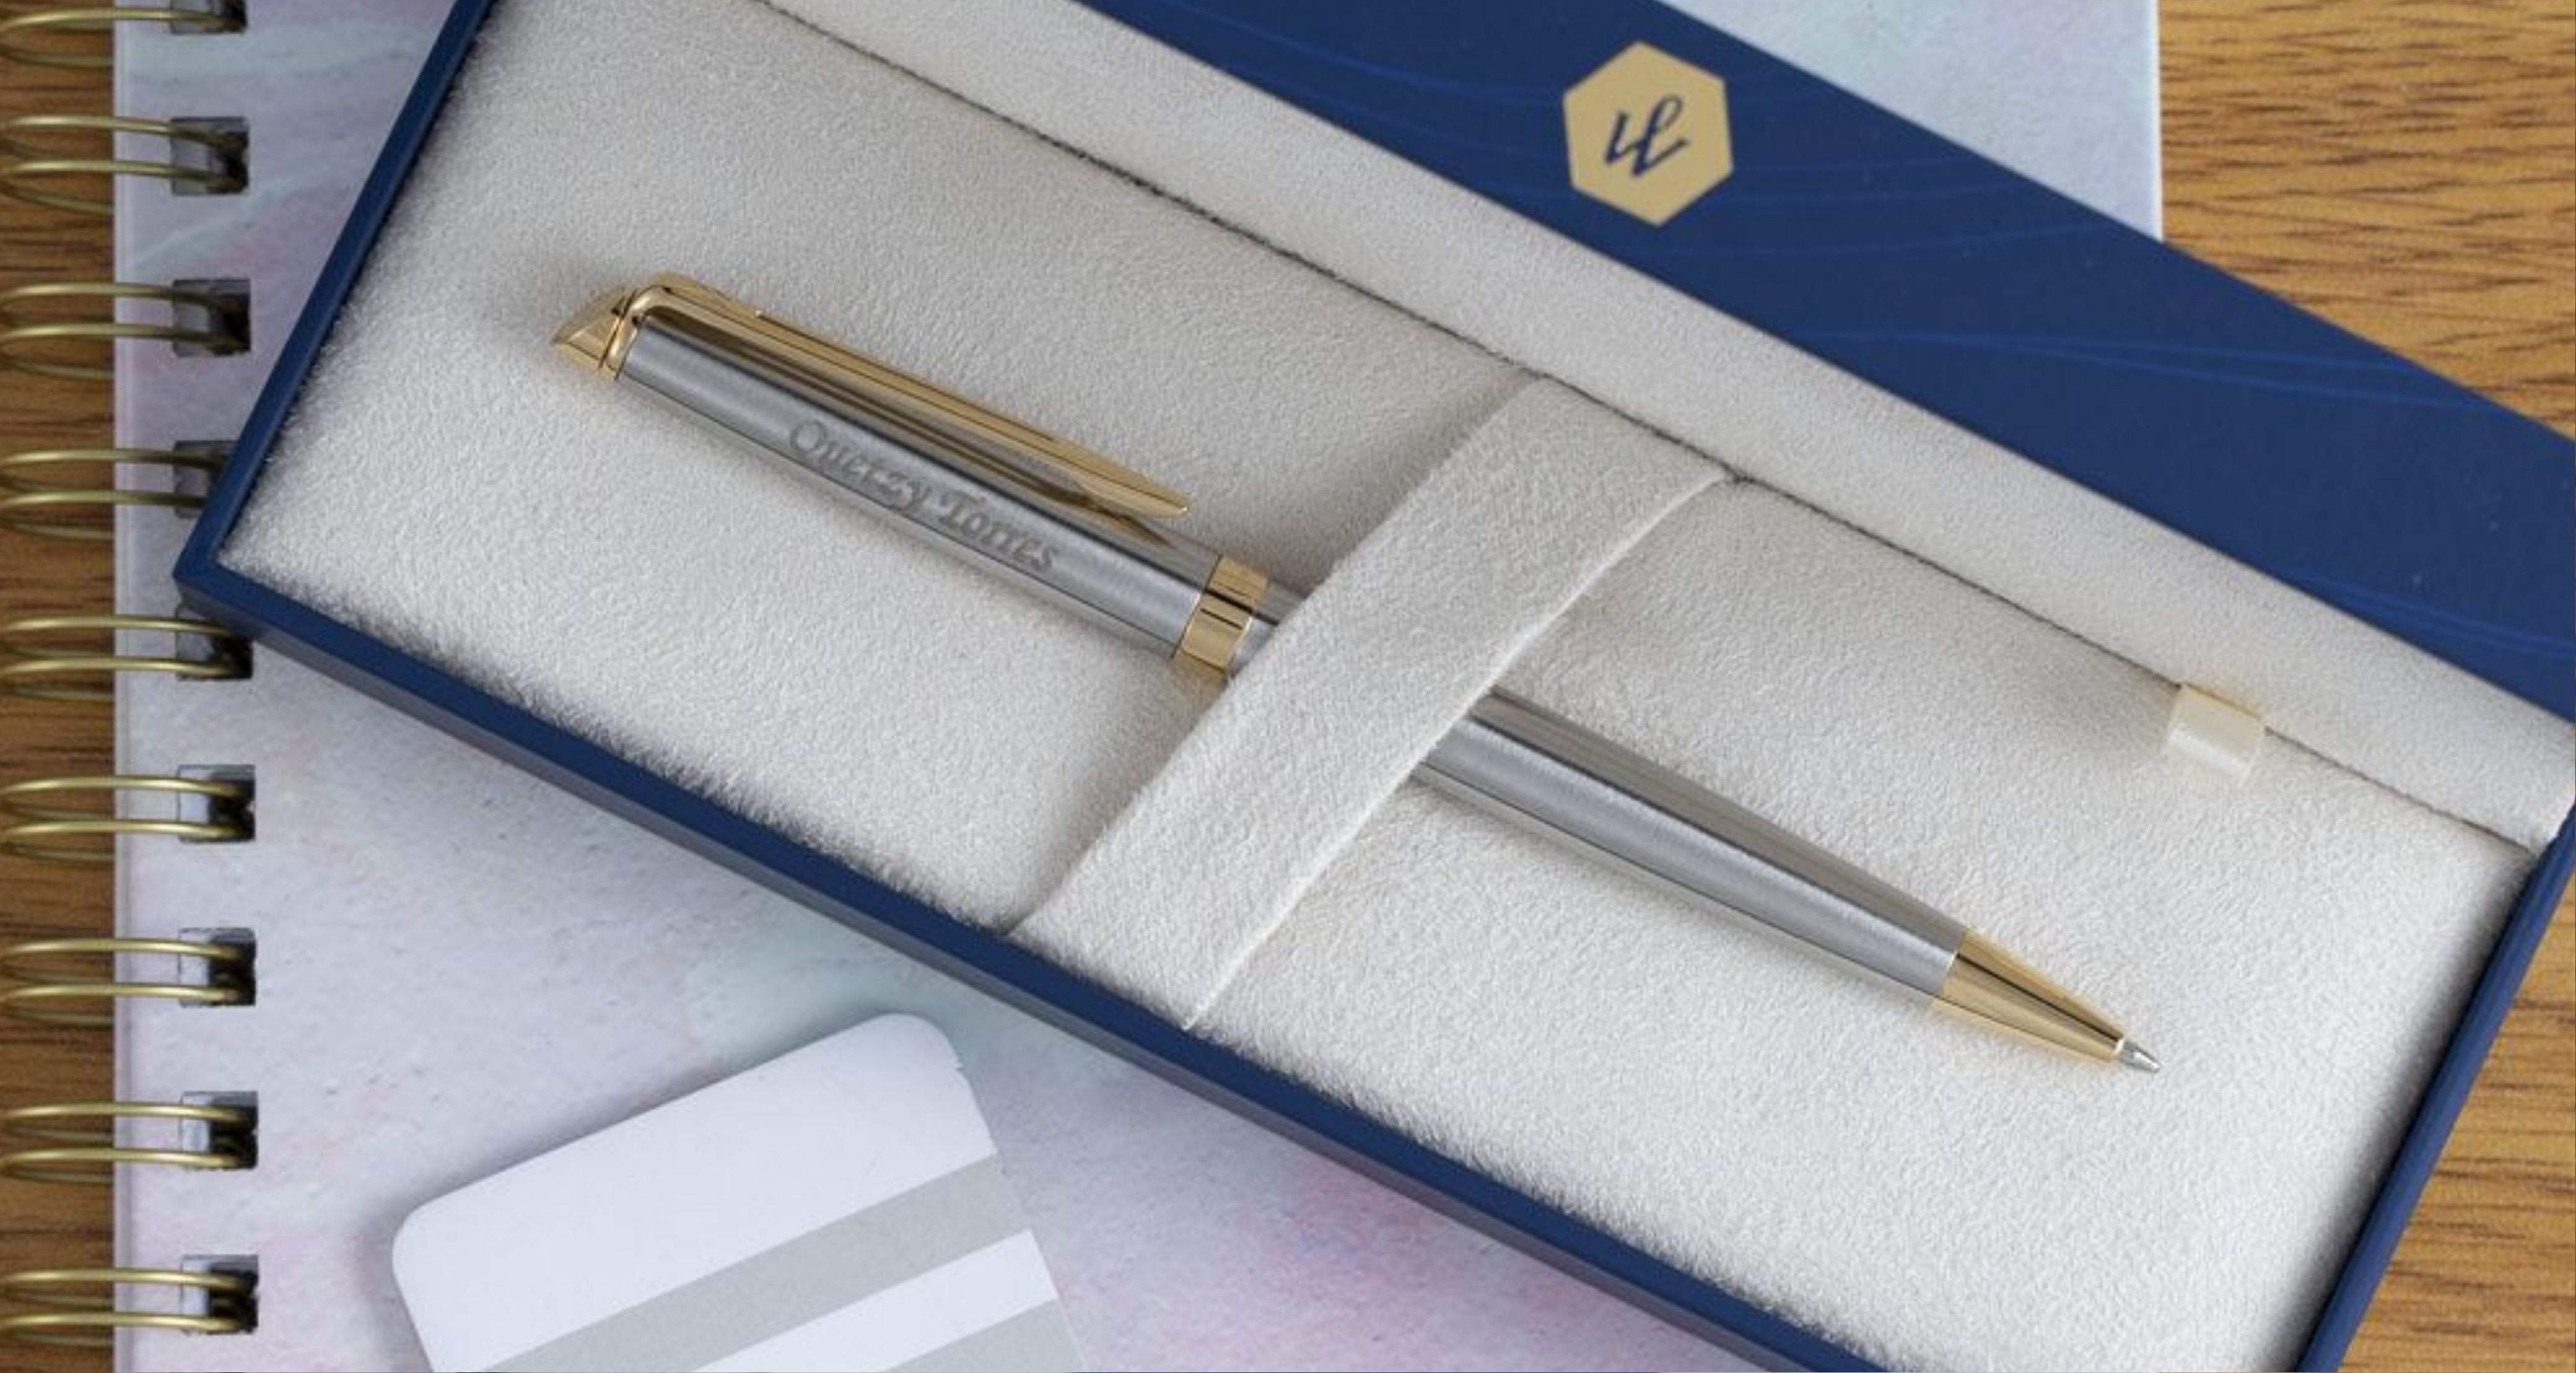 Thin Barrel Pens and Pencils - Free Engraving for Personalization -  Dayspring Pens